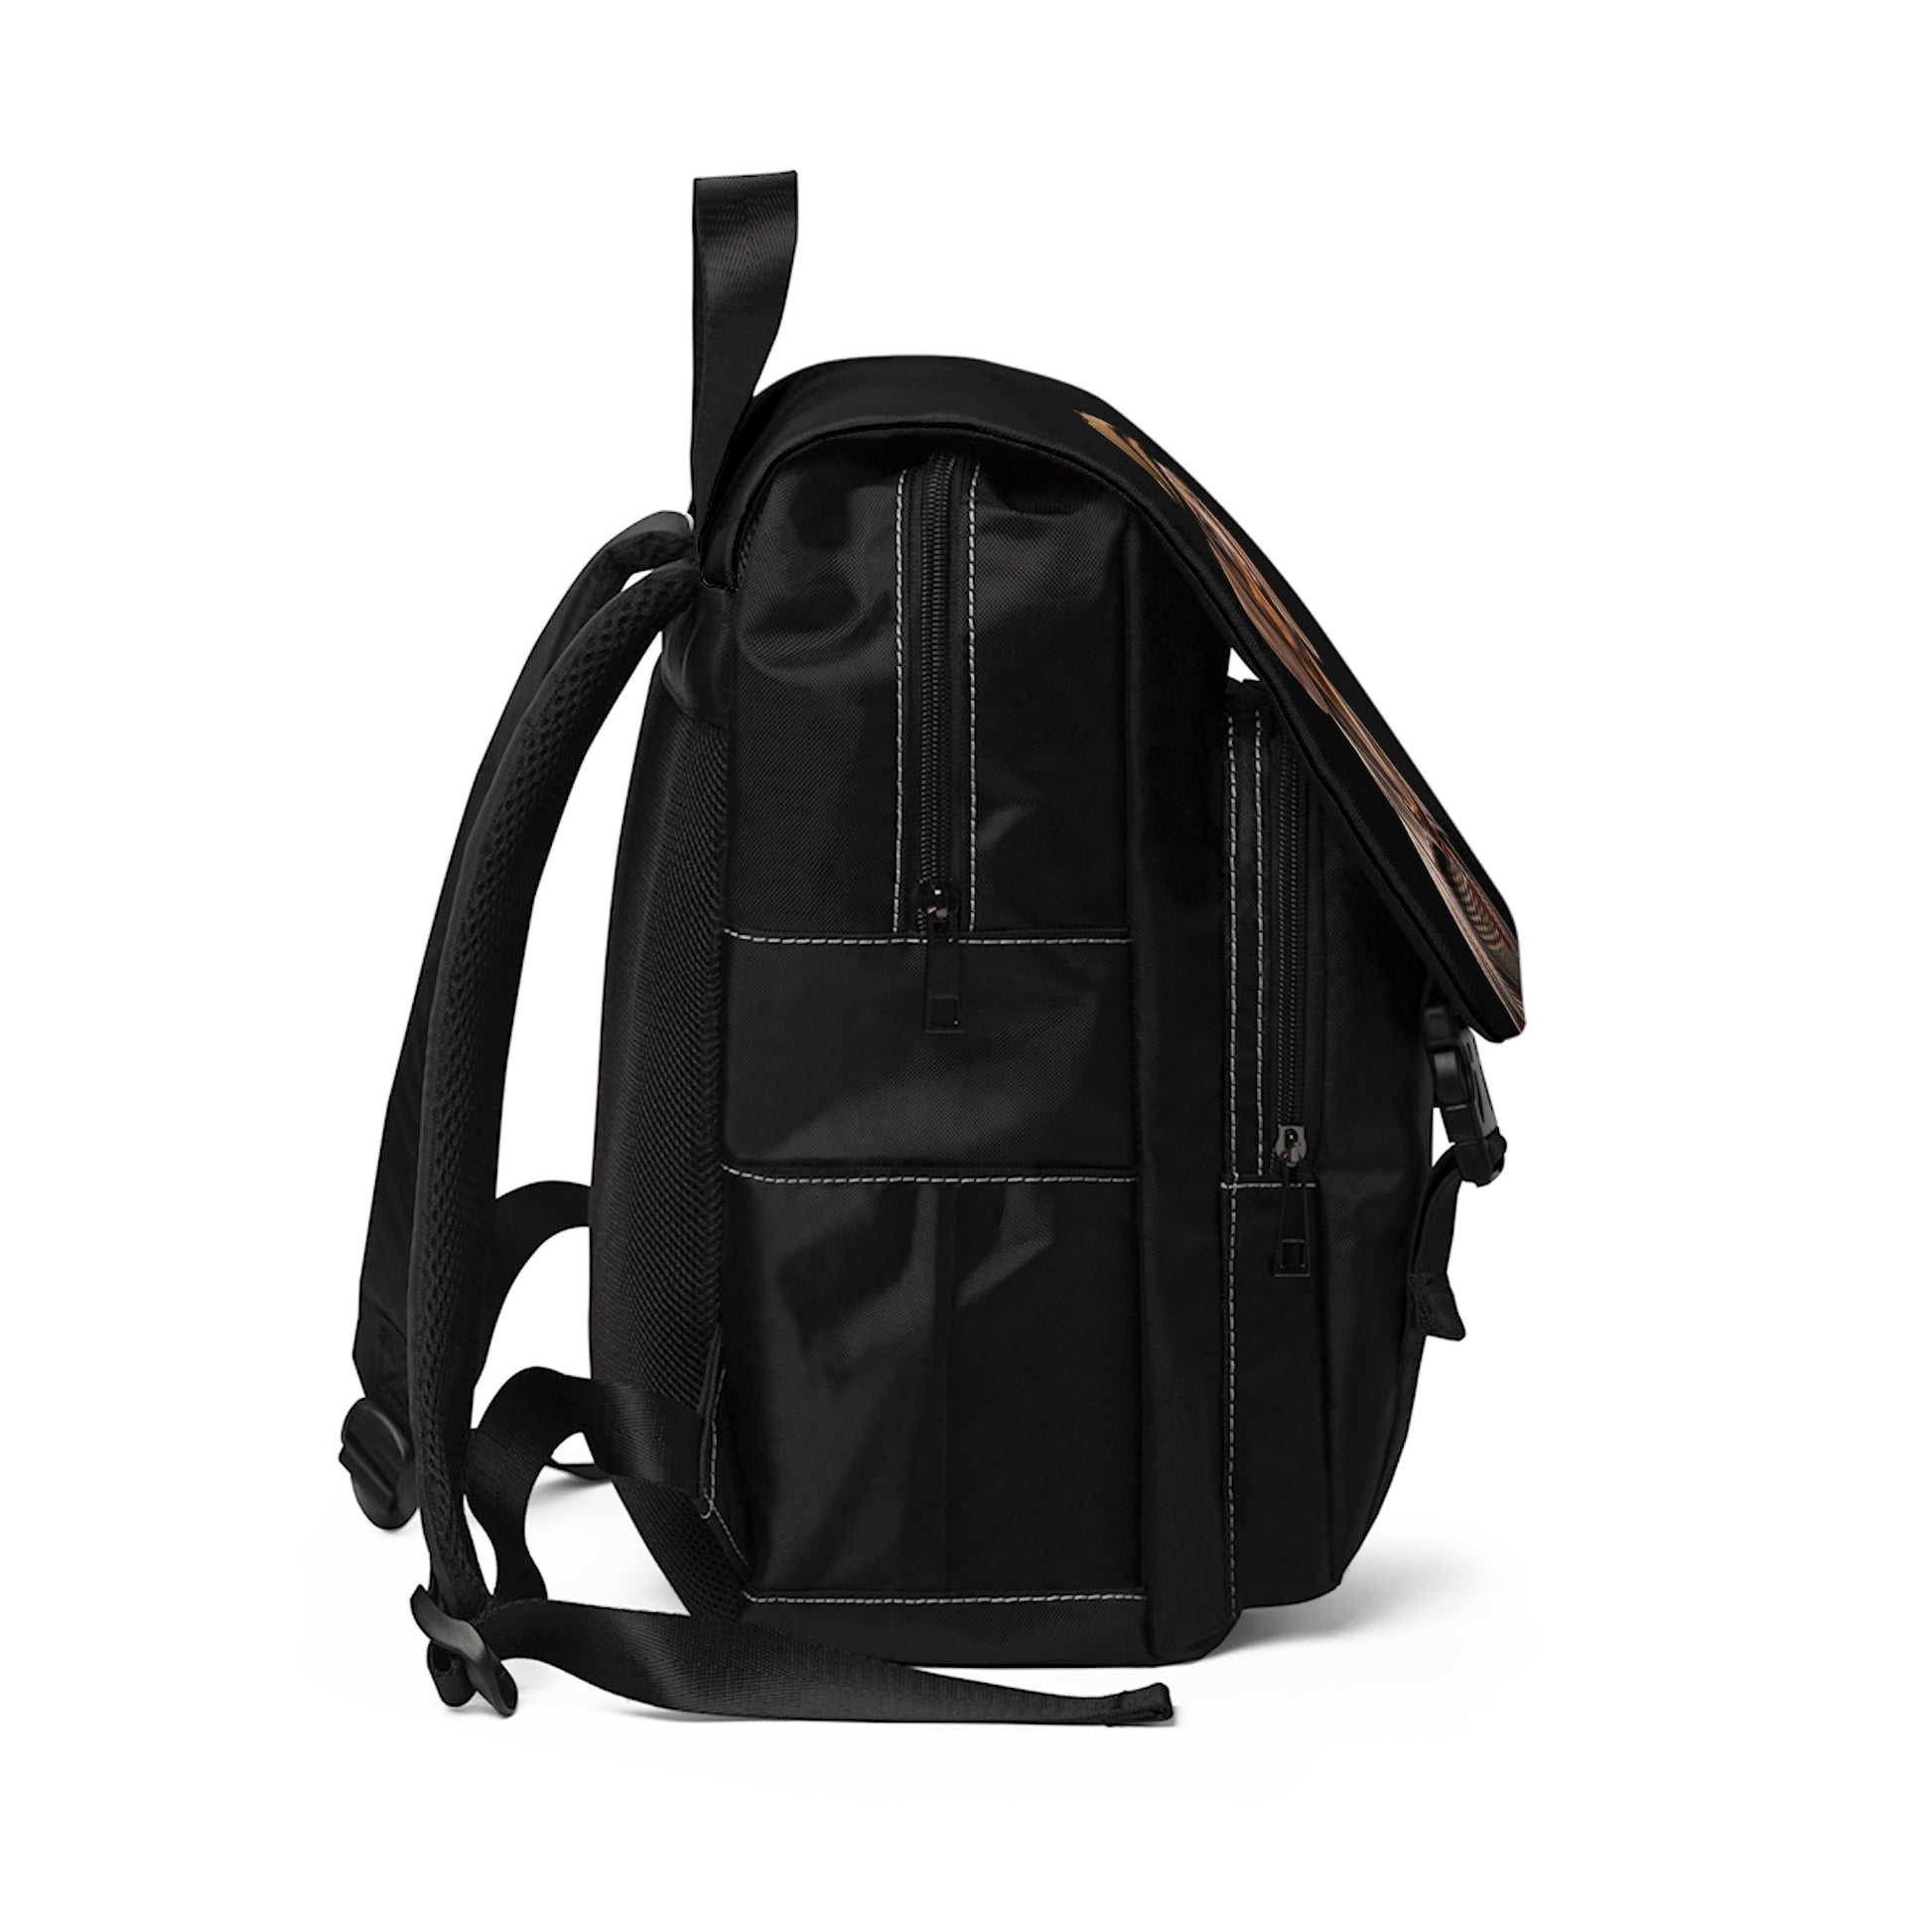 DONNY : Unisex Casual Shoulder Backpack - Shaggy Chic